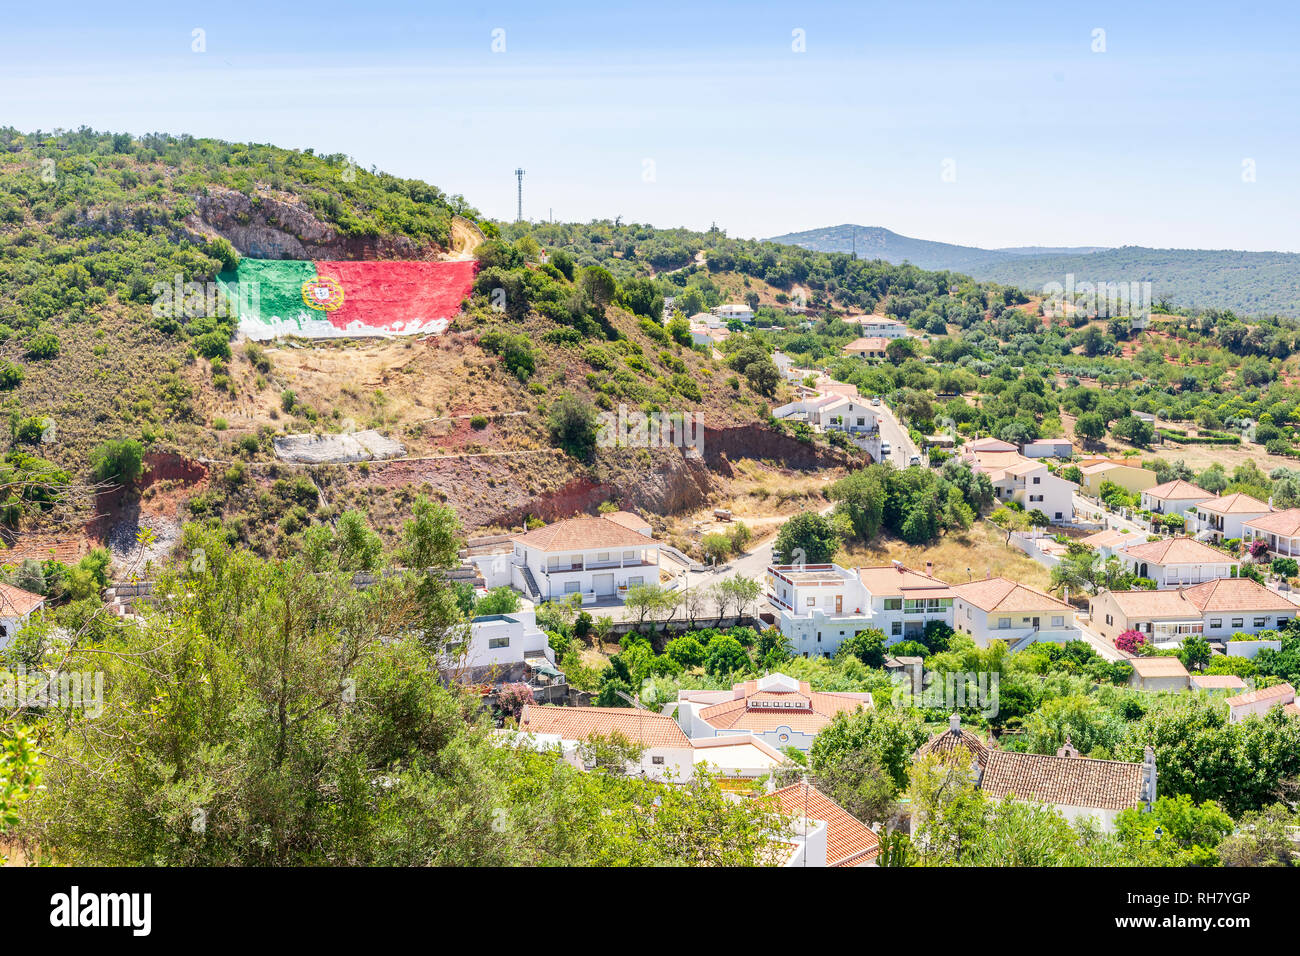 Picturesque Alte cityscape, little town located in hills of Algarve, Portugal Stock Photo